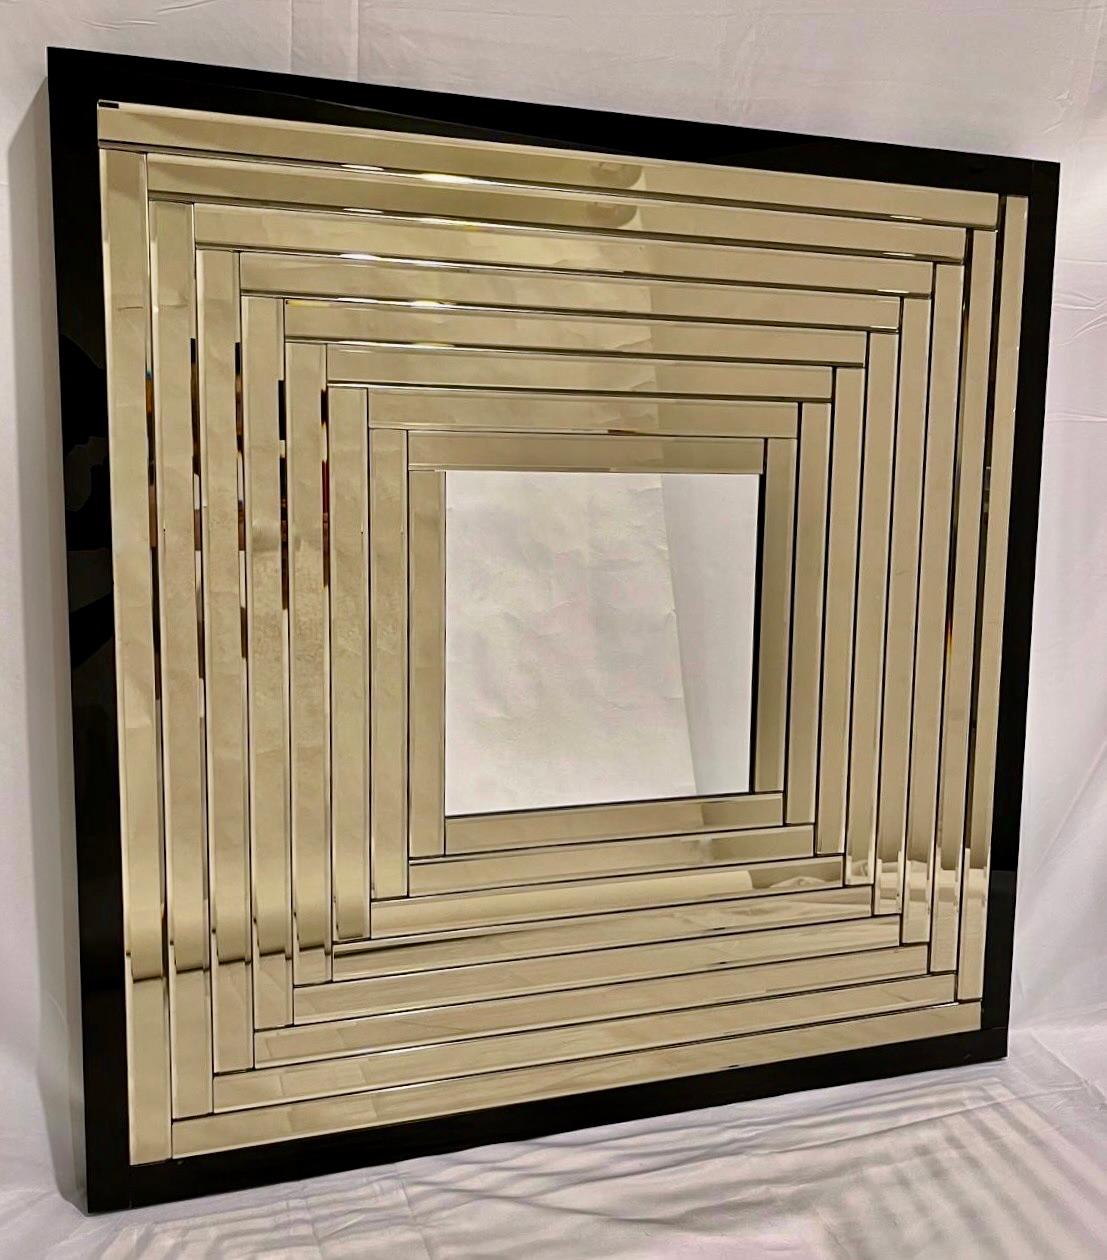 A Minimalist elegant sculpture mirror, entirely handcrafted in Italy, executed as a Work of Art, highest quality of construction and attention to details: eight gradient frames in mirrored Murano glass with a sophisticated rose pink smoked bronze